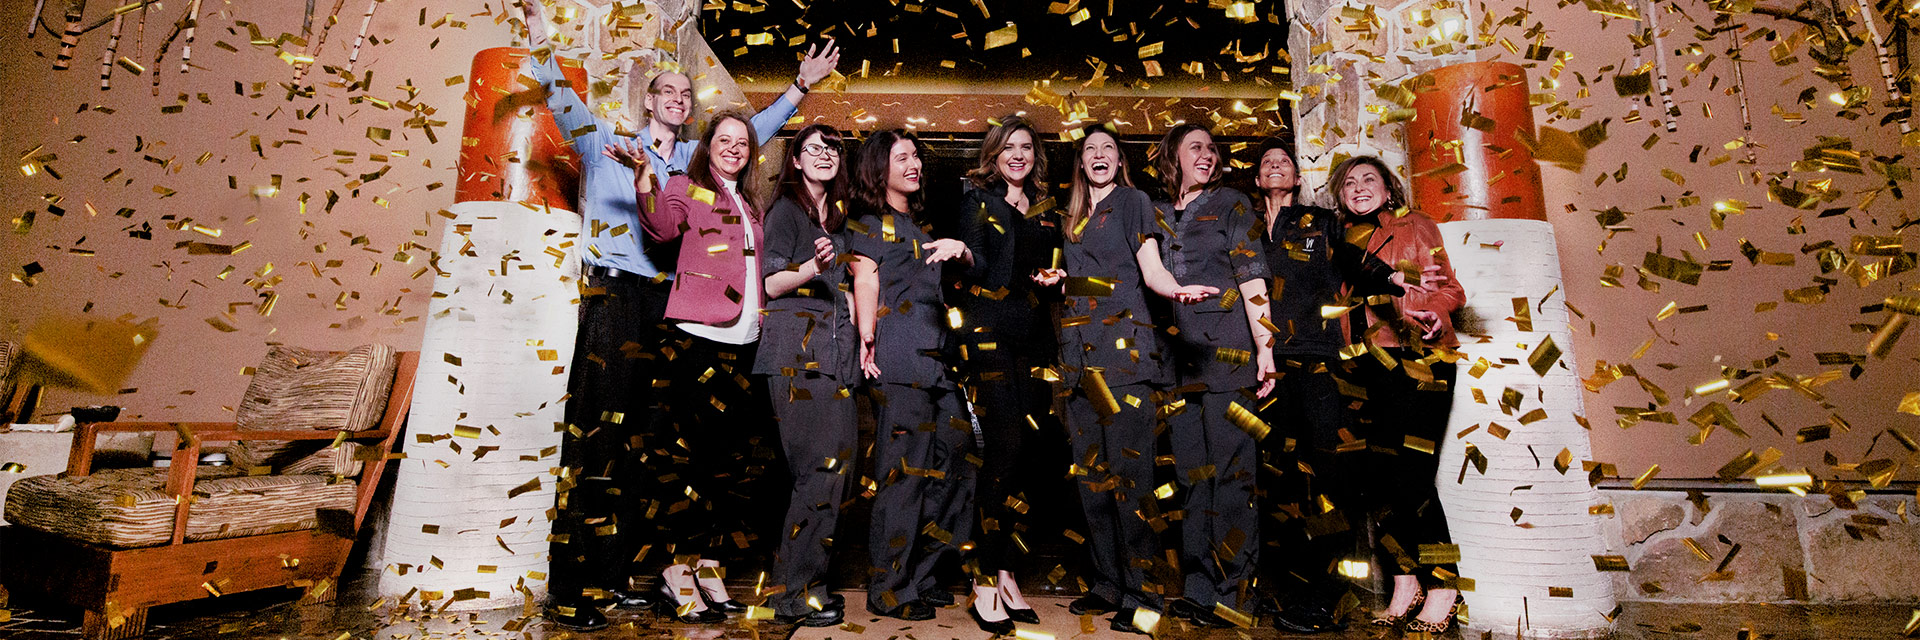 A group of women standing and smiling with confetti in the air